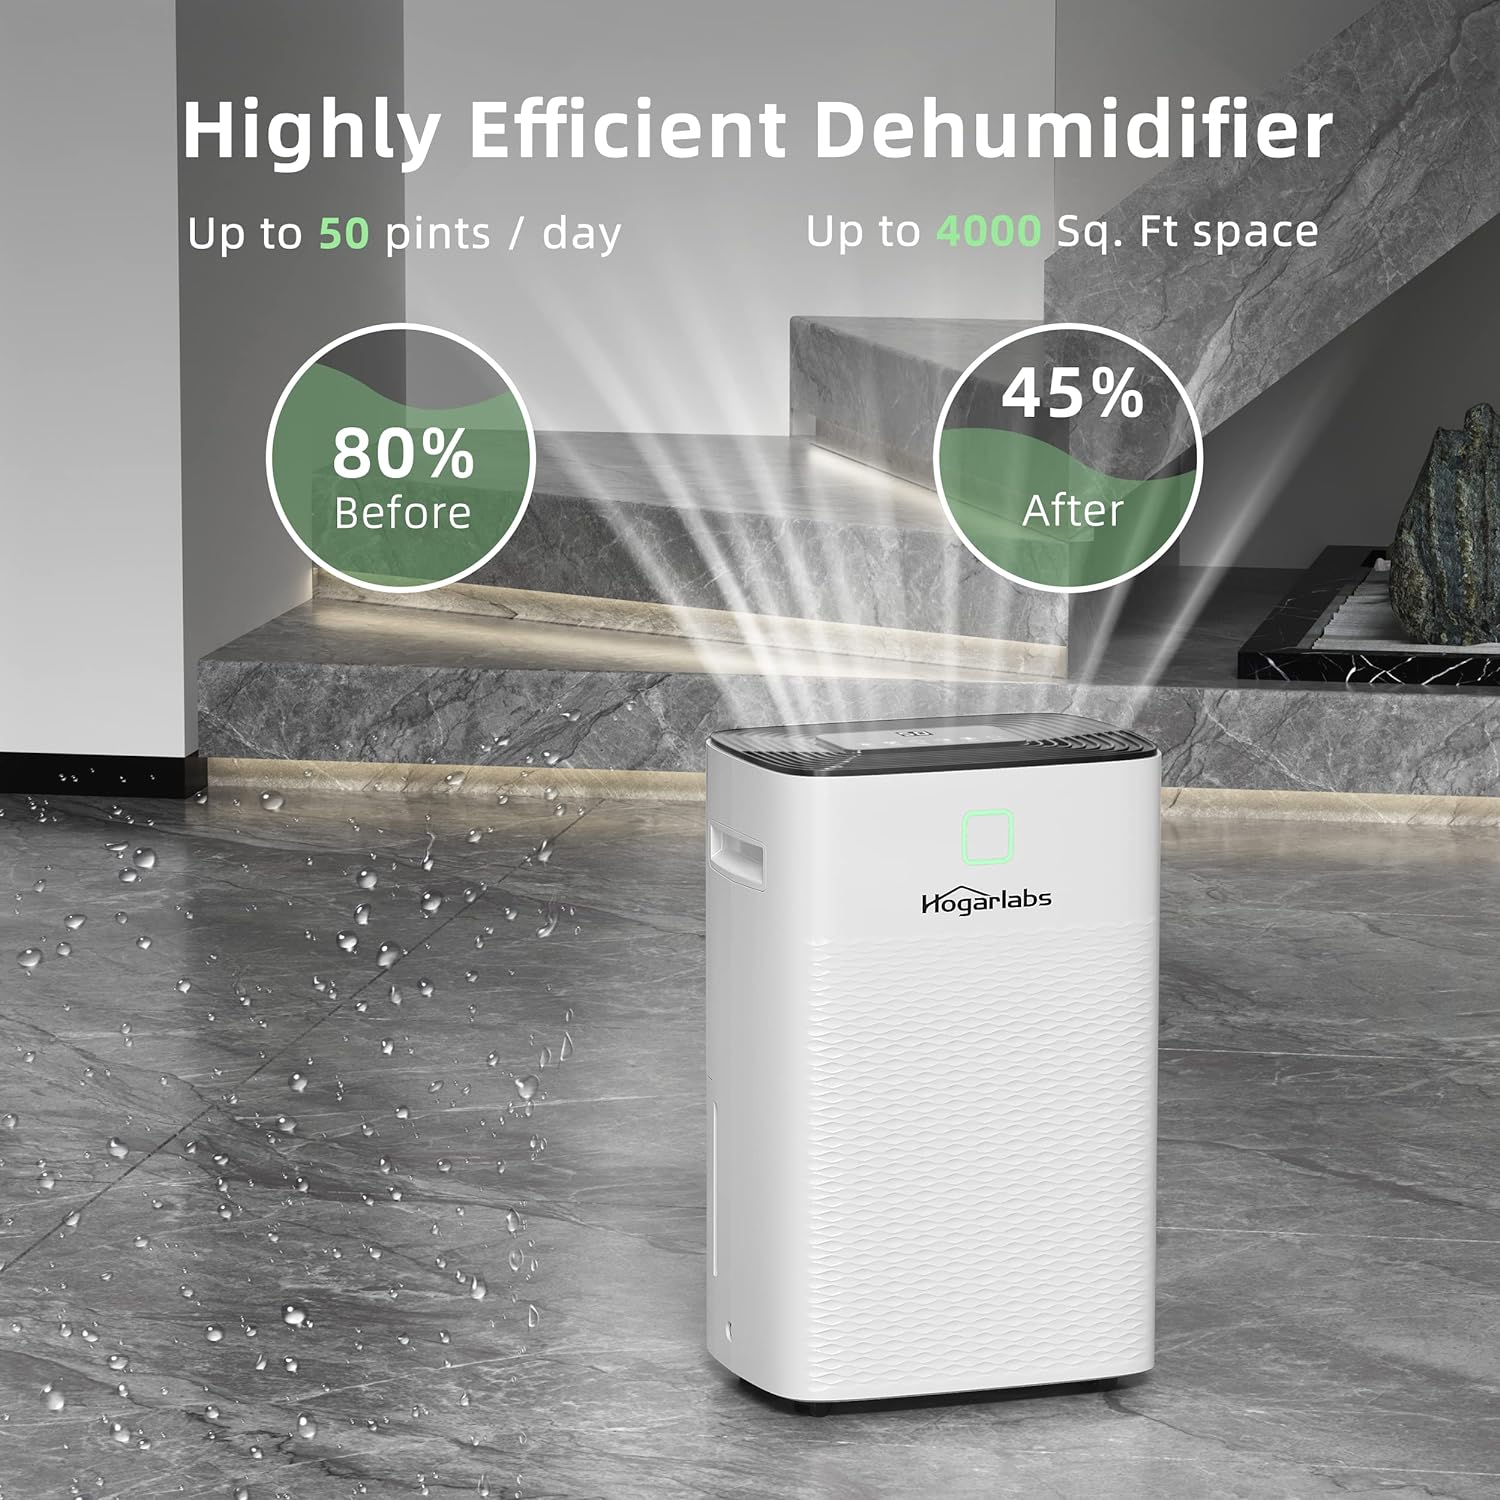 HOGARLABS 30 Pint Dehumidifiers Up to 2000 Sq Ft for Continuous Dehumidify, Home Dehumidifier with Digital Control Panel and Drain Hose for Basements, Bedroom, Bathroom. White